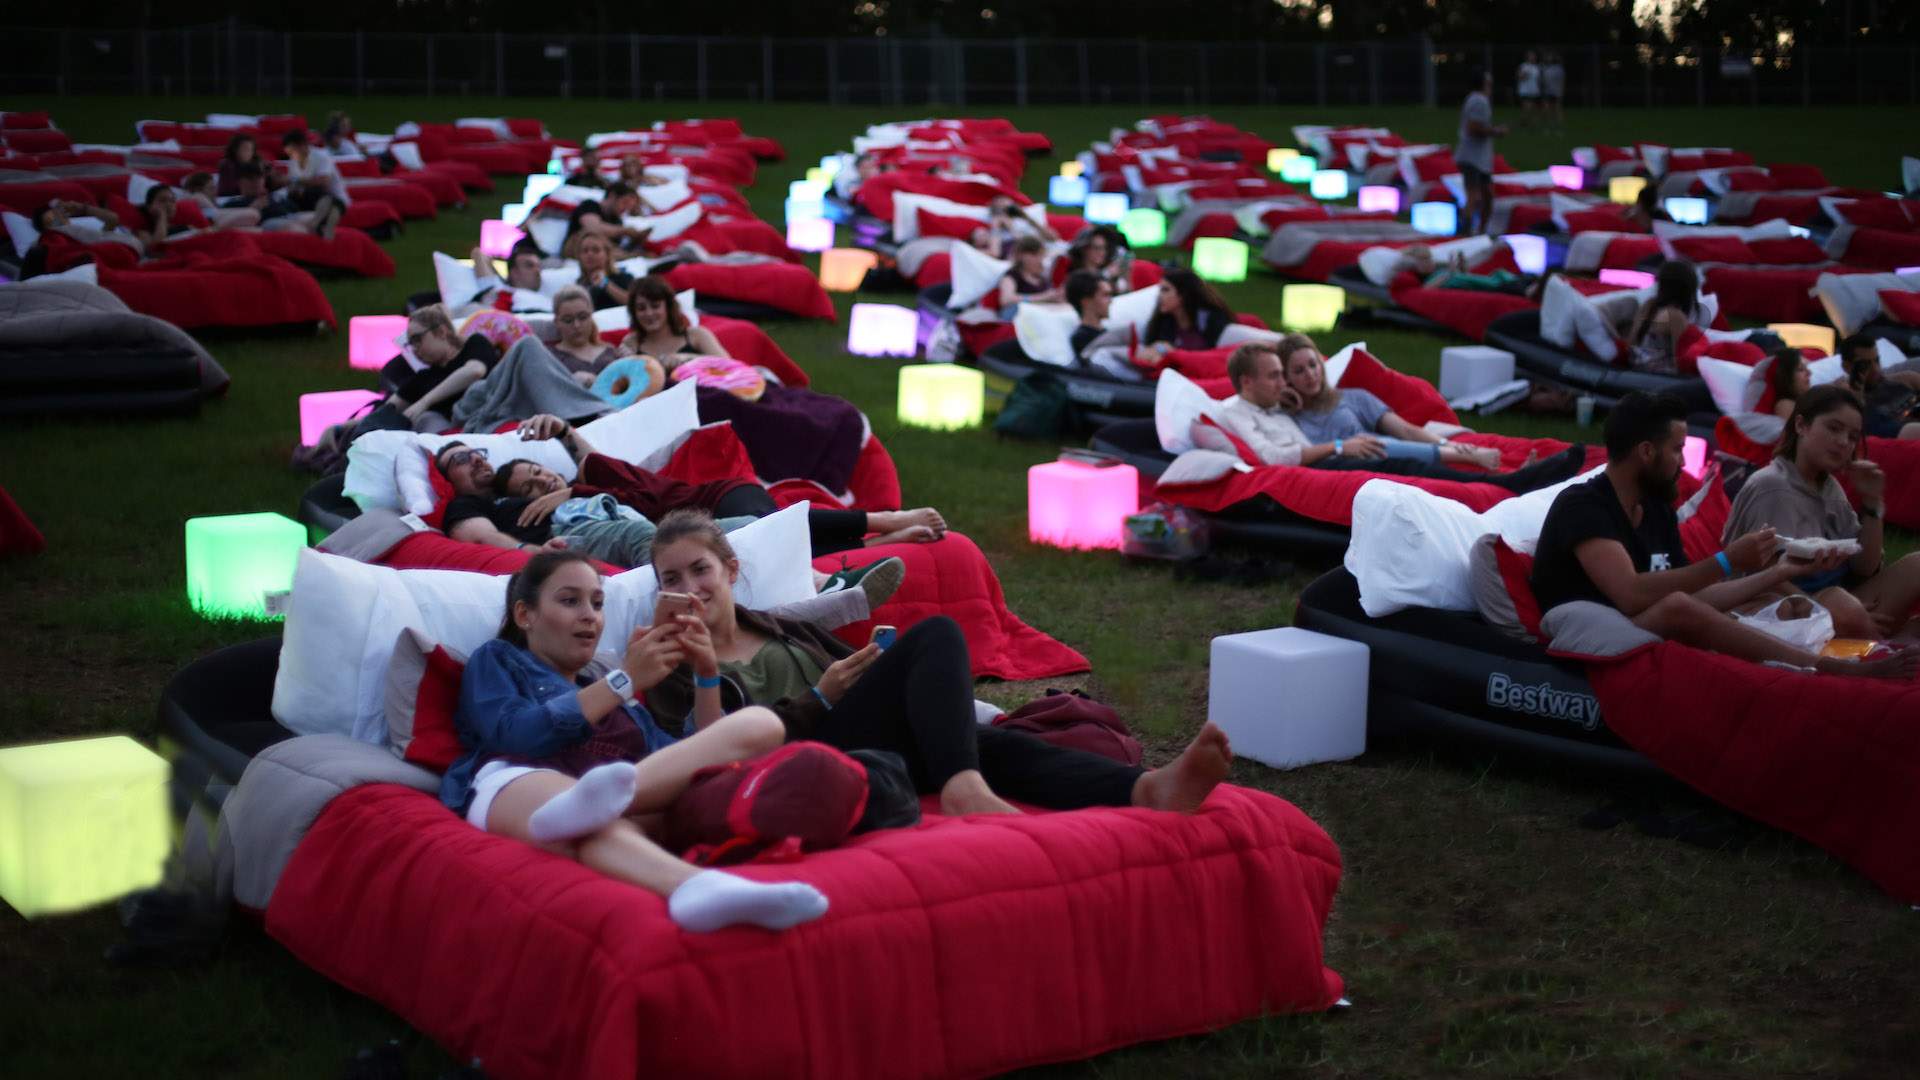 Australia's Outdoor Bed Cinema Is Embarking on Its First National Tour